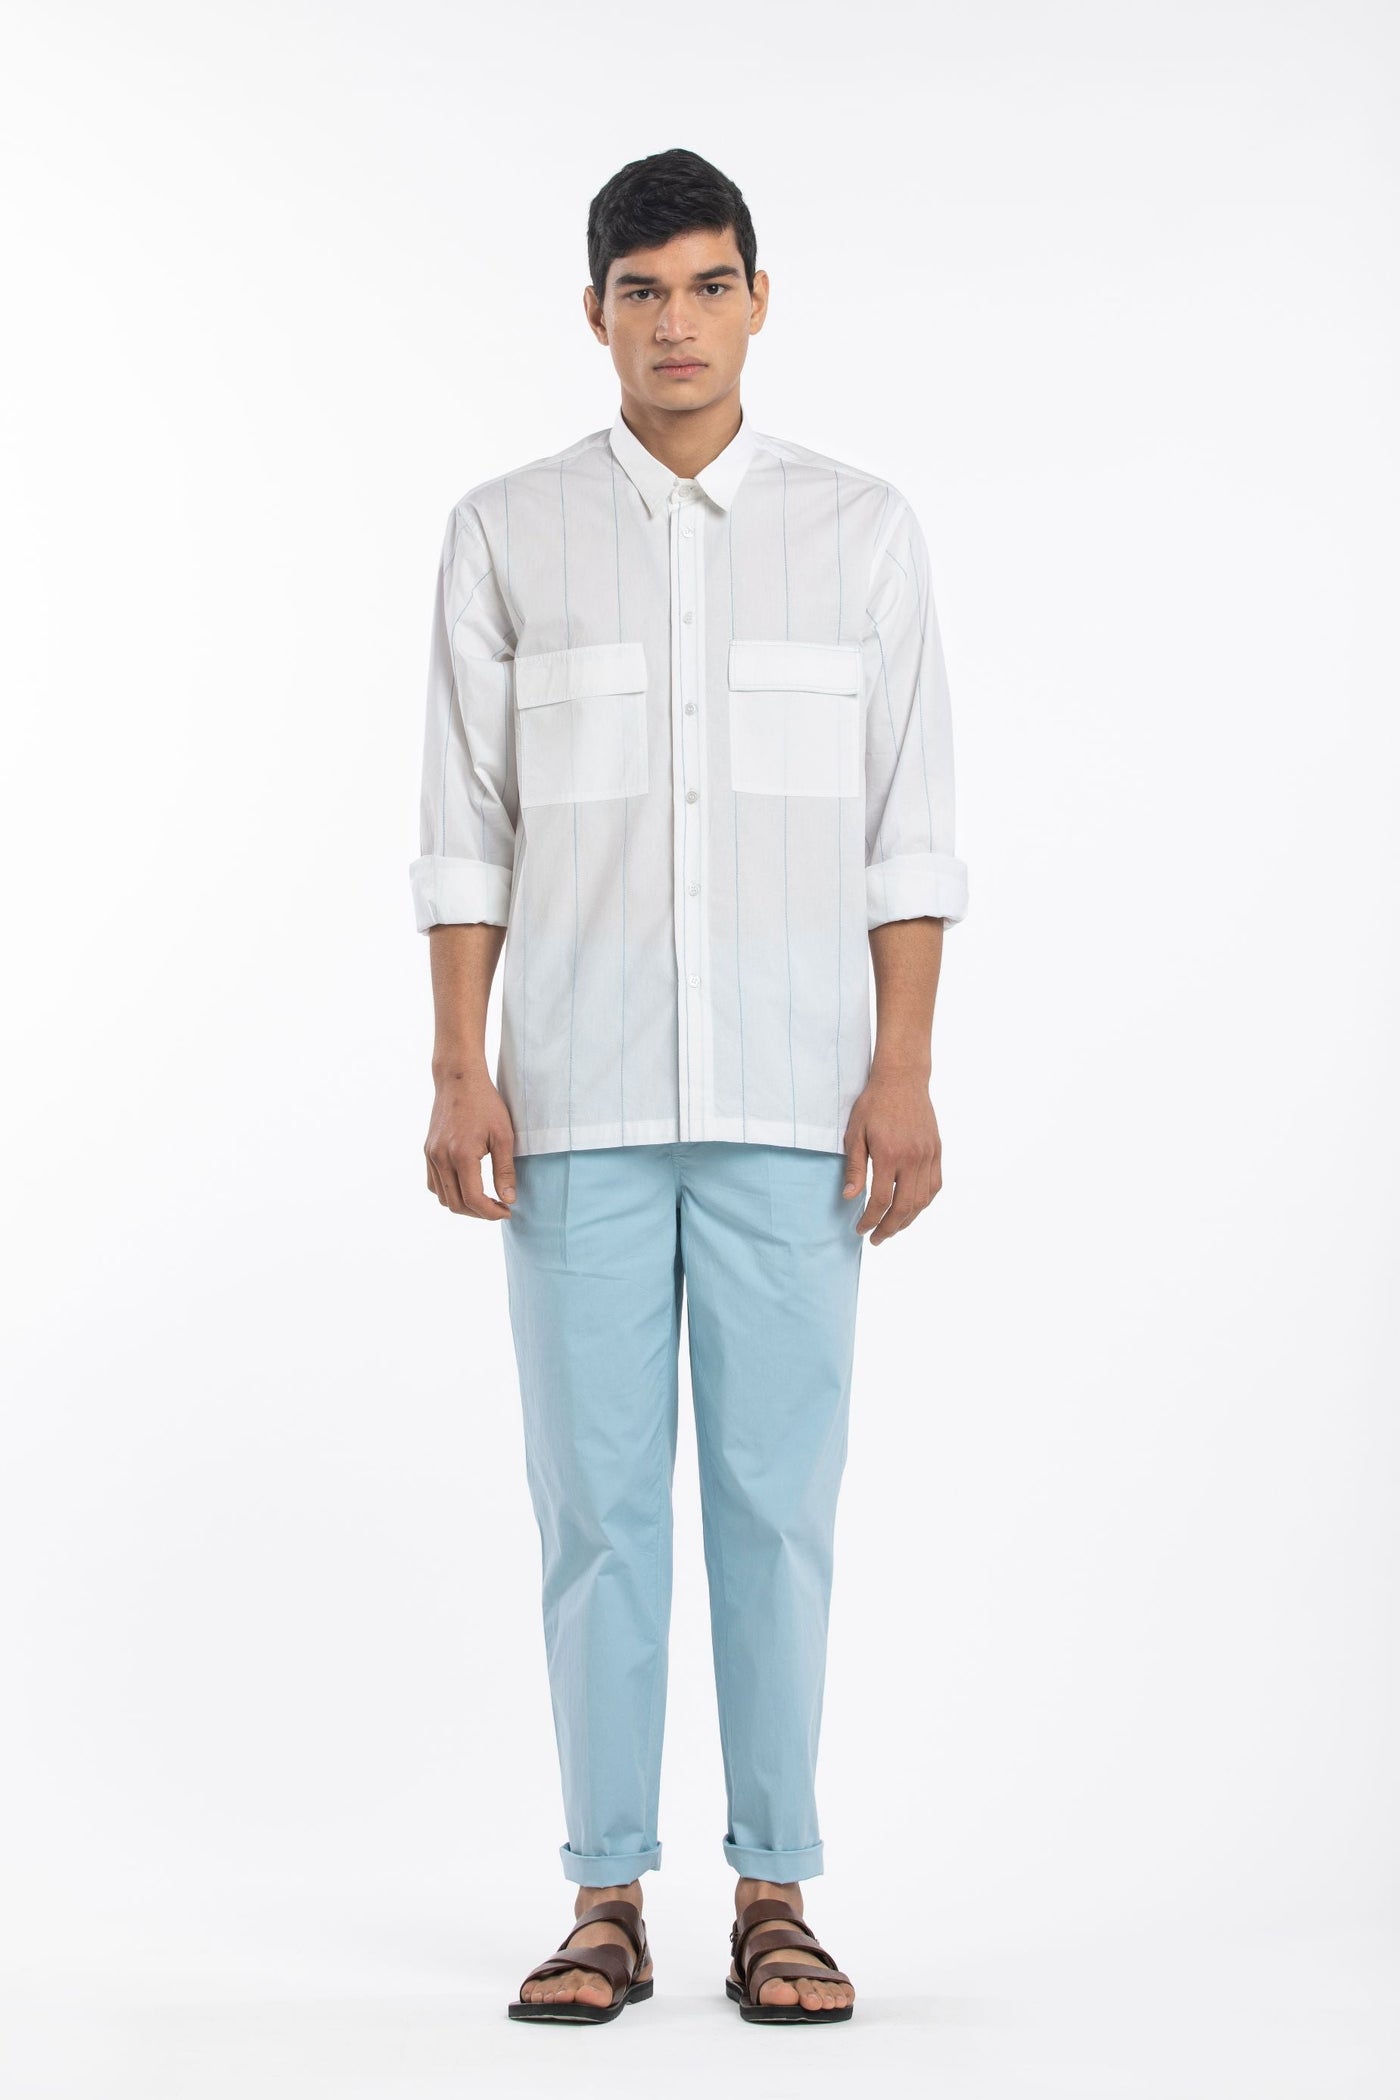 Linear Embroidered Shirt Co-ord- White Men THREE Men 